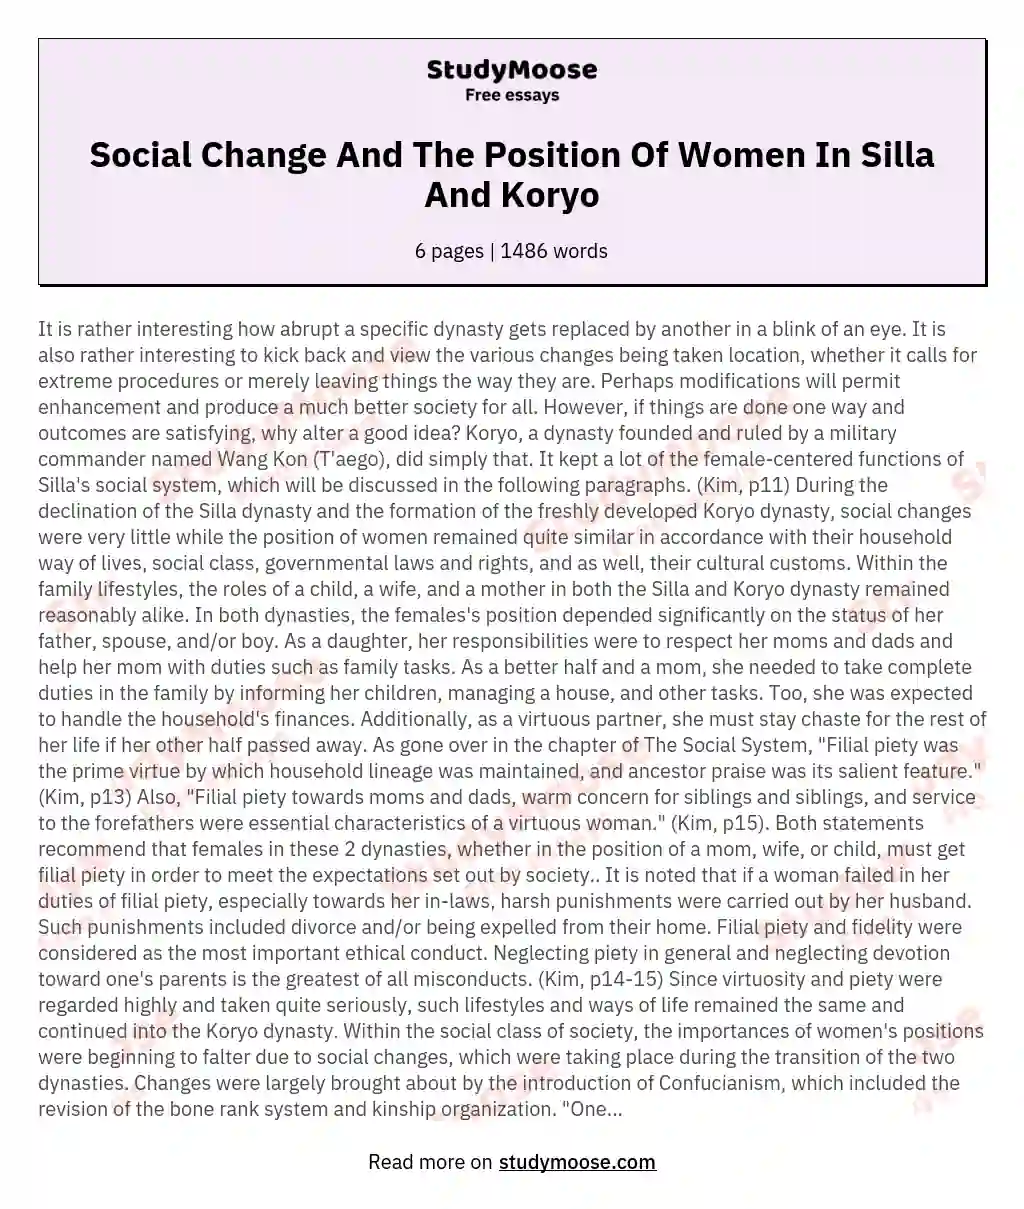 Social Change And The Position Of Women In Silla And Koryo essay